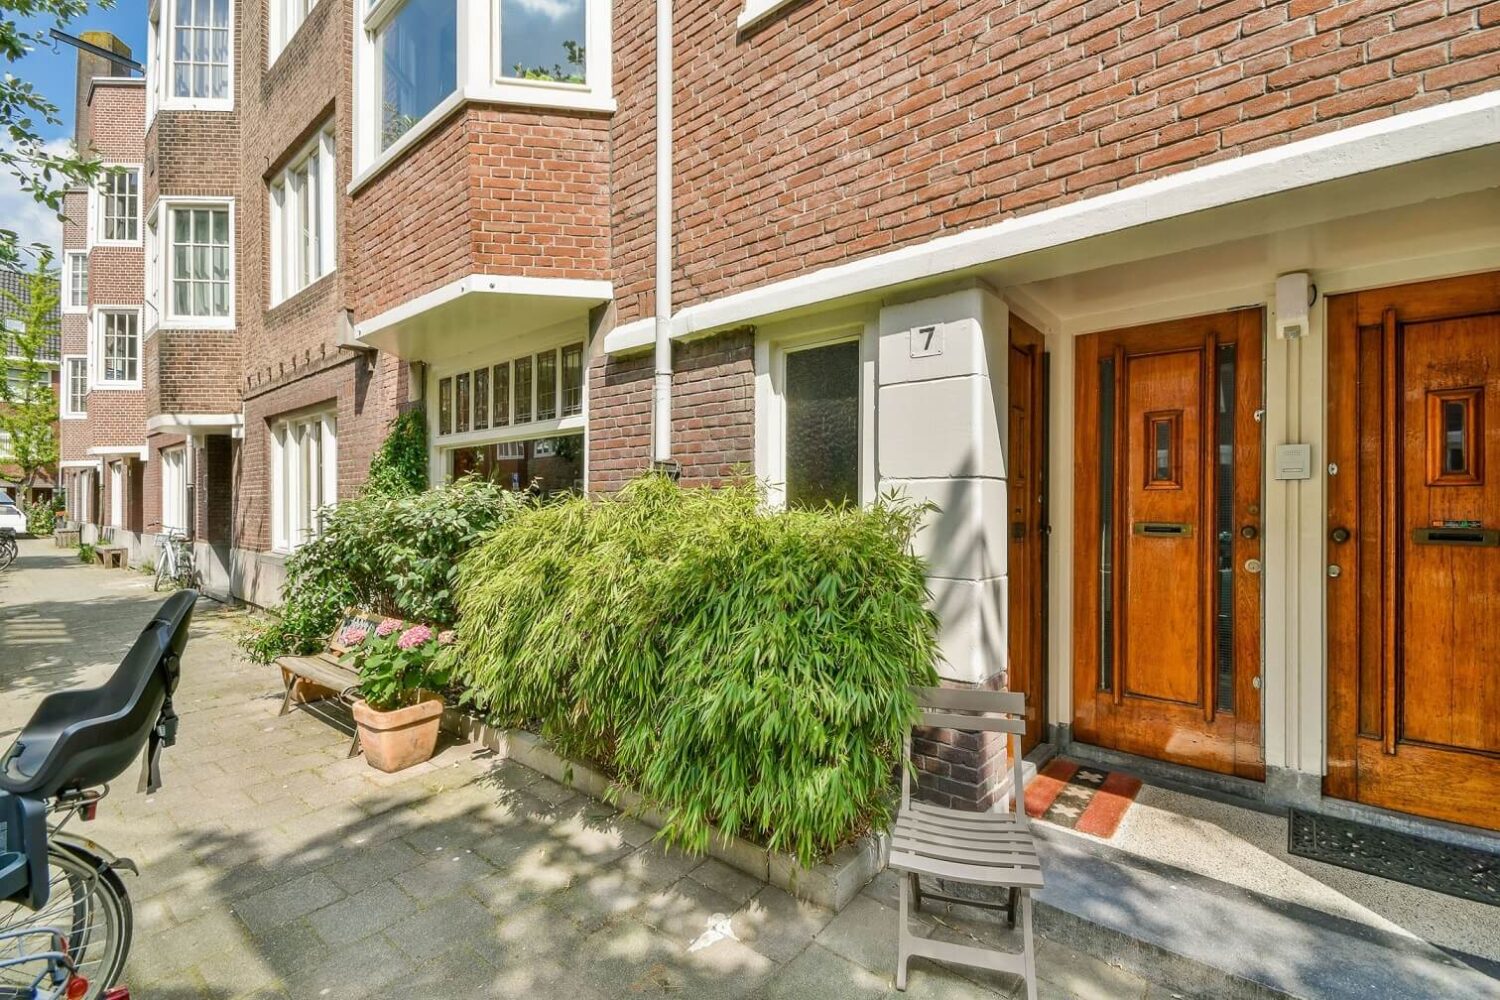 exterior-townhouse-amsterdam-nordroom